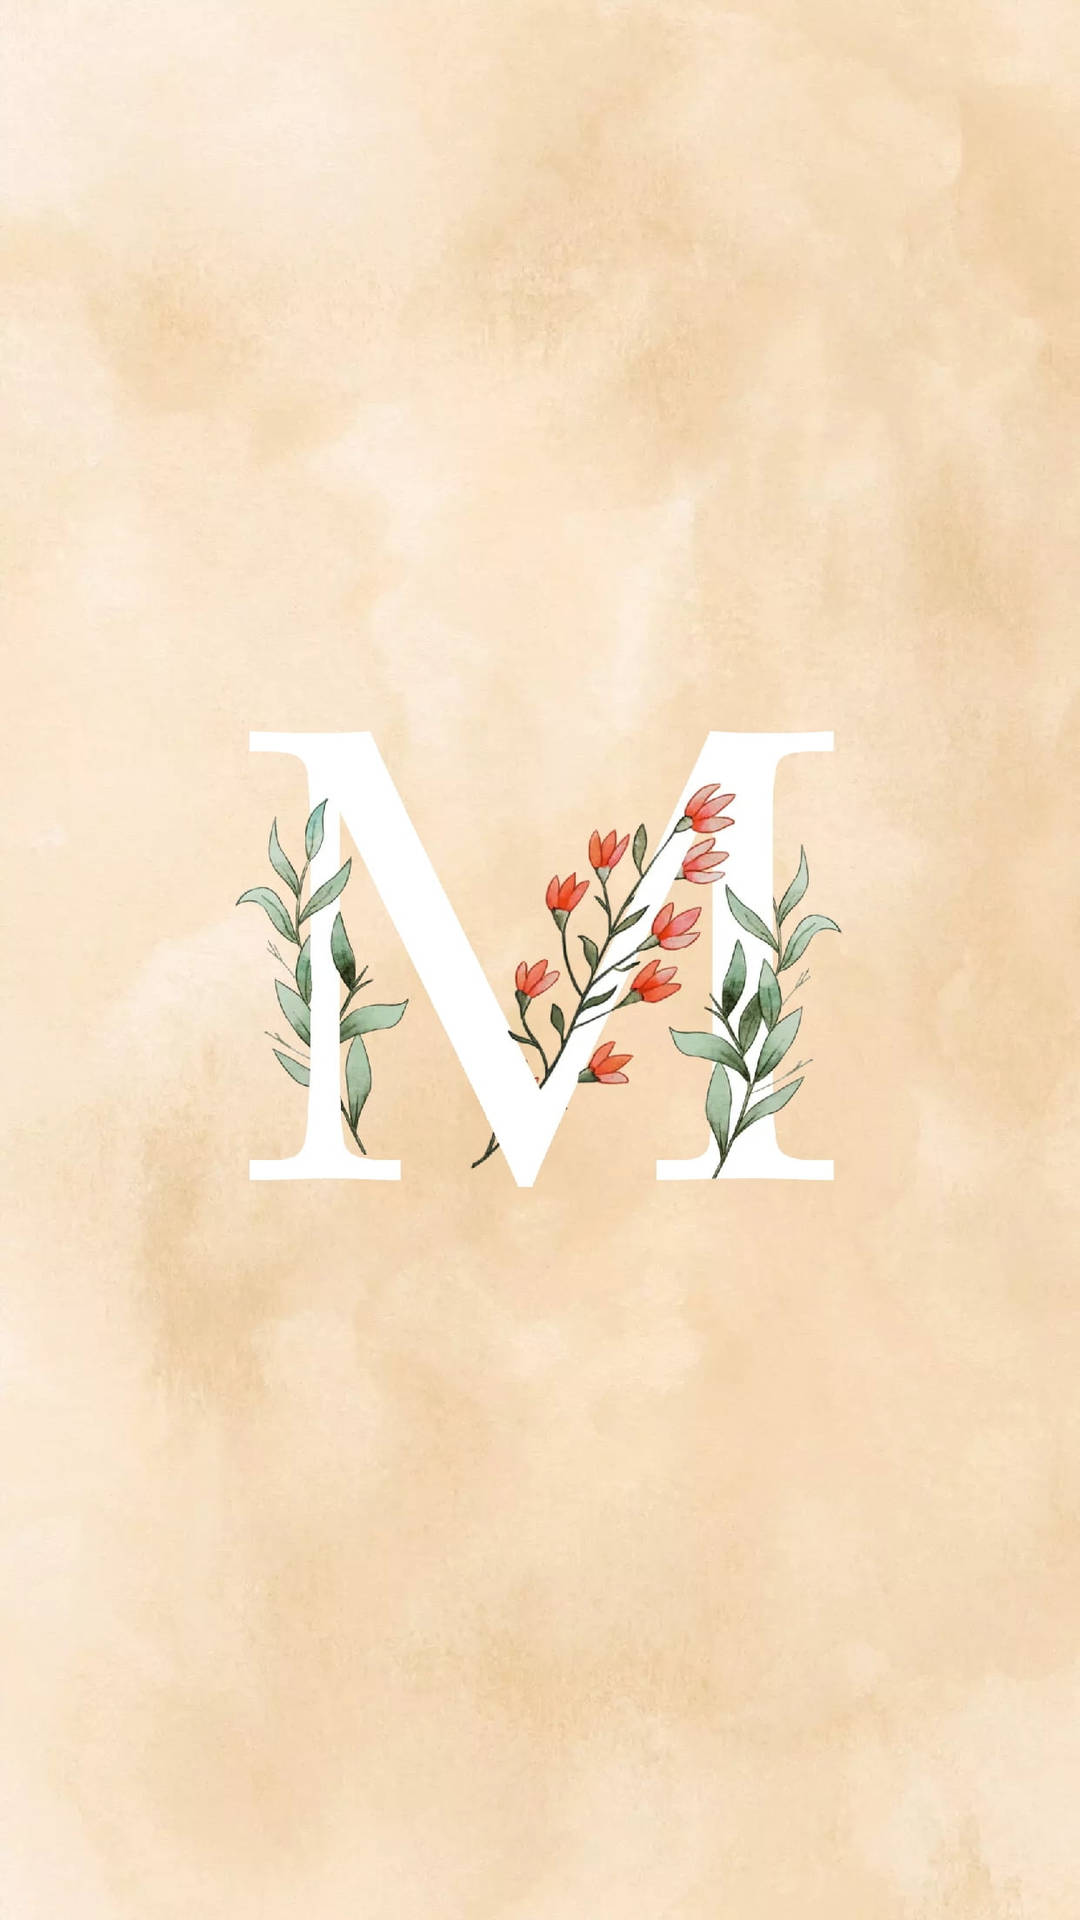 Letter M Small Flowers